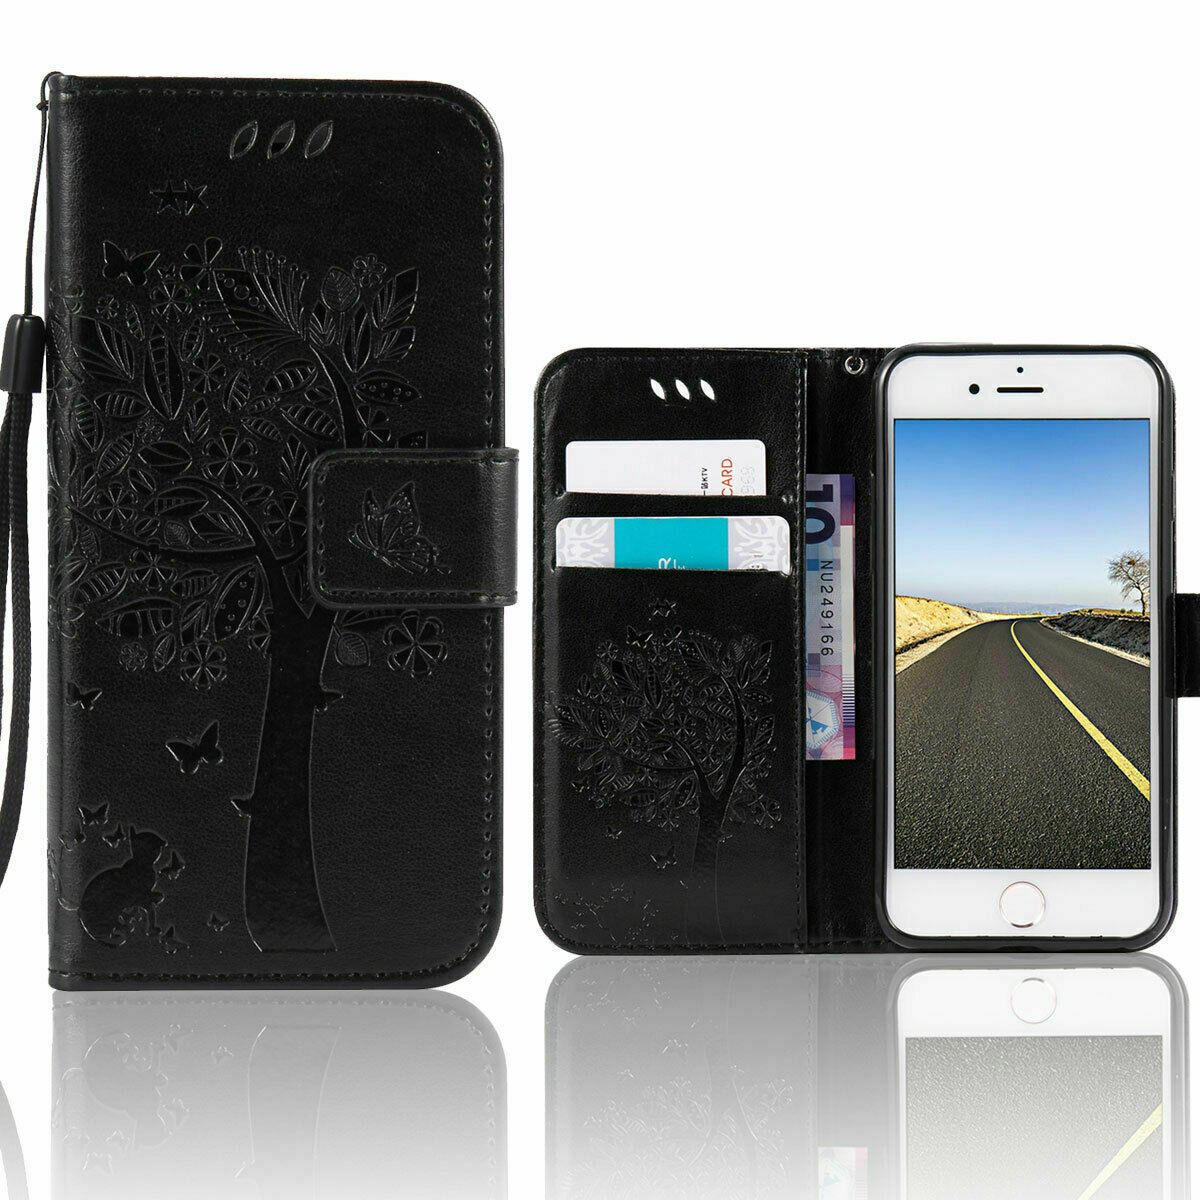 Magnetic Leather Wallet Case For iPhone 8 7 6s Plus X XS MAX XR Flip Cover Stand stekim-92 Black iPhone6/6S 